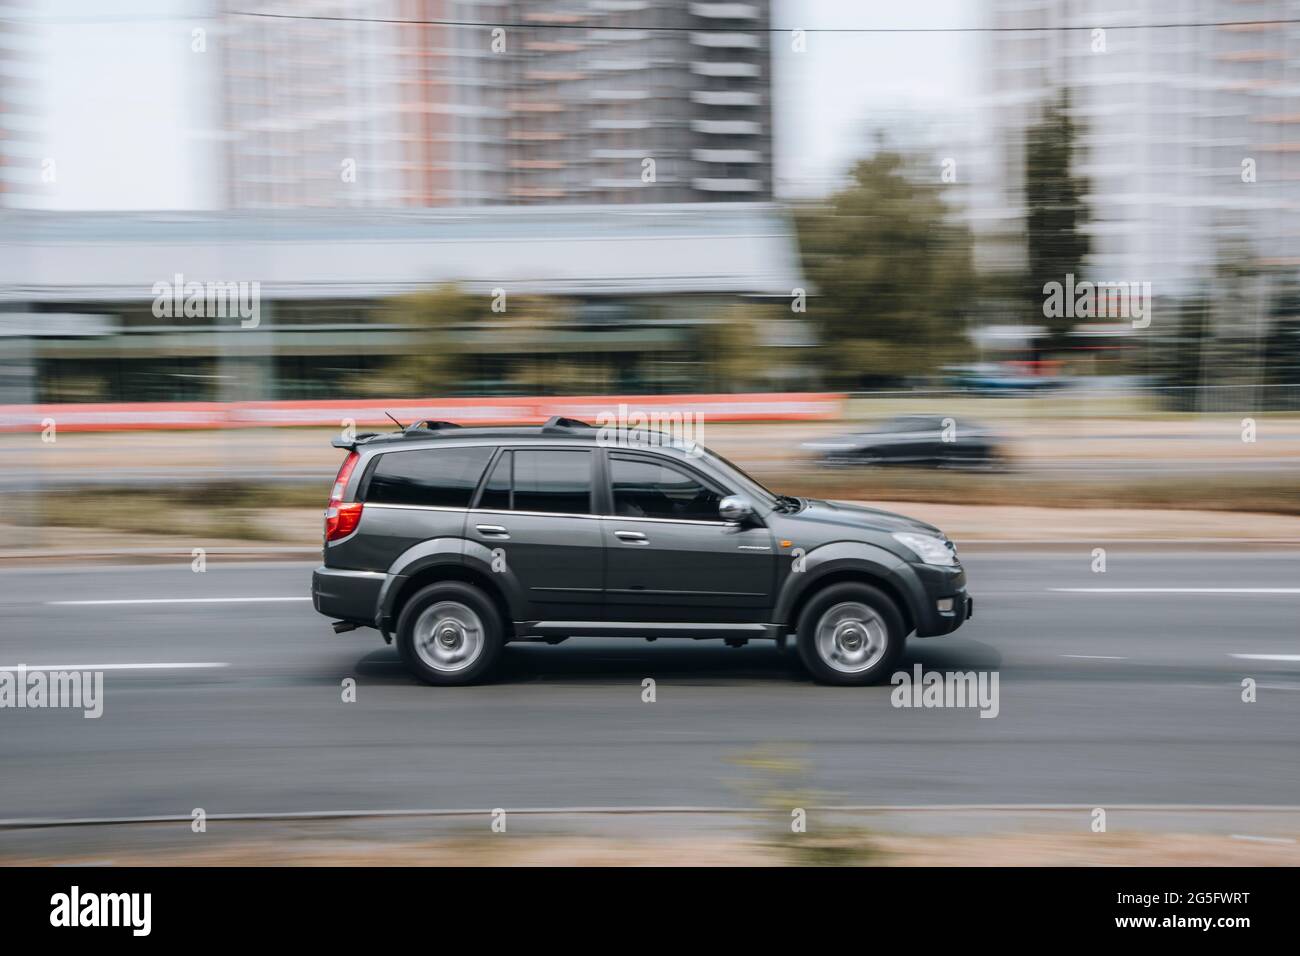 Ukraine, Kyiv - 29 April 2021: Black Great Wall Hover car moving on the street. Editorial Stock Photo